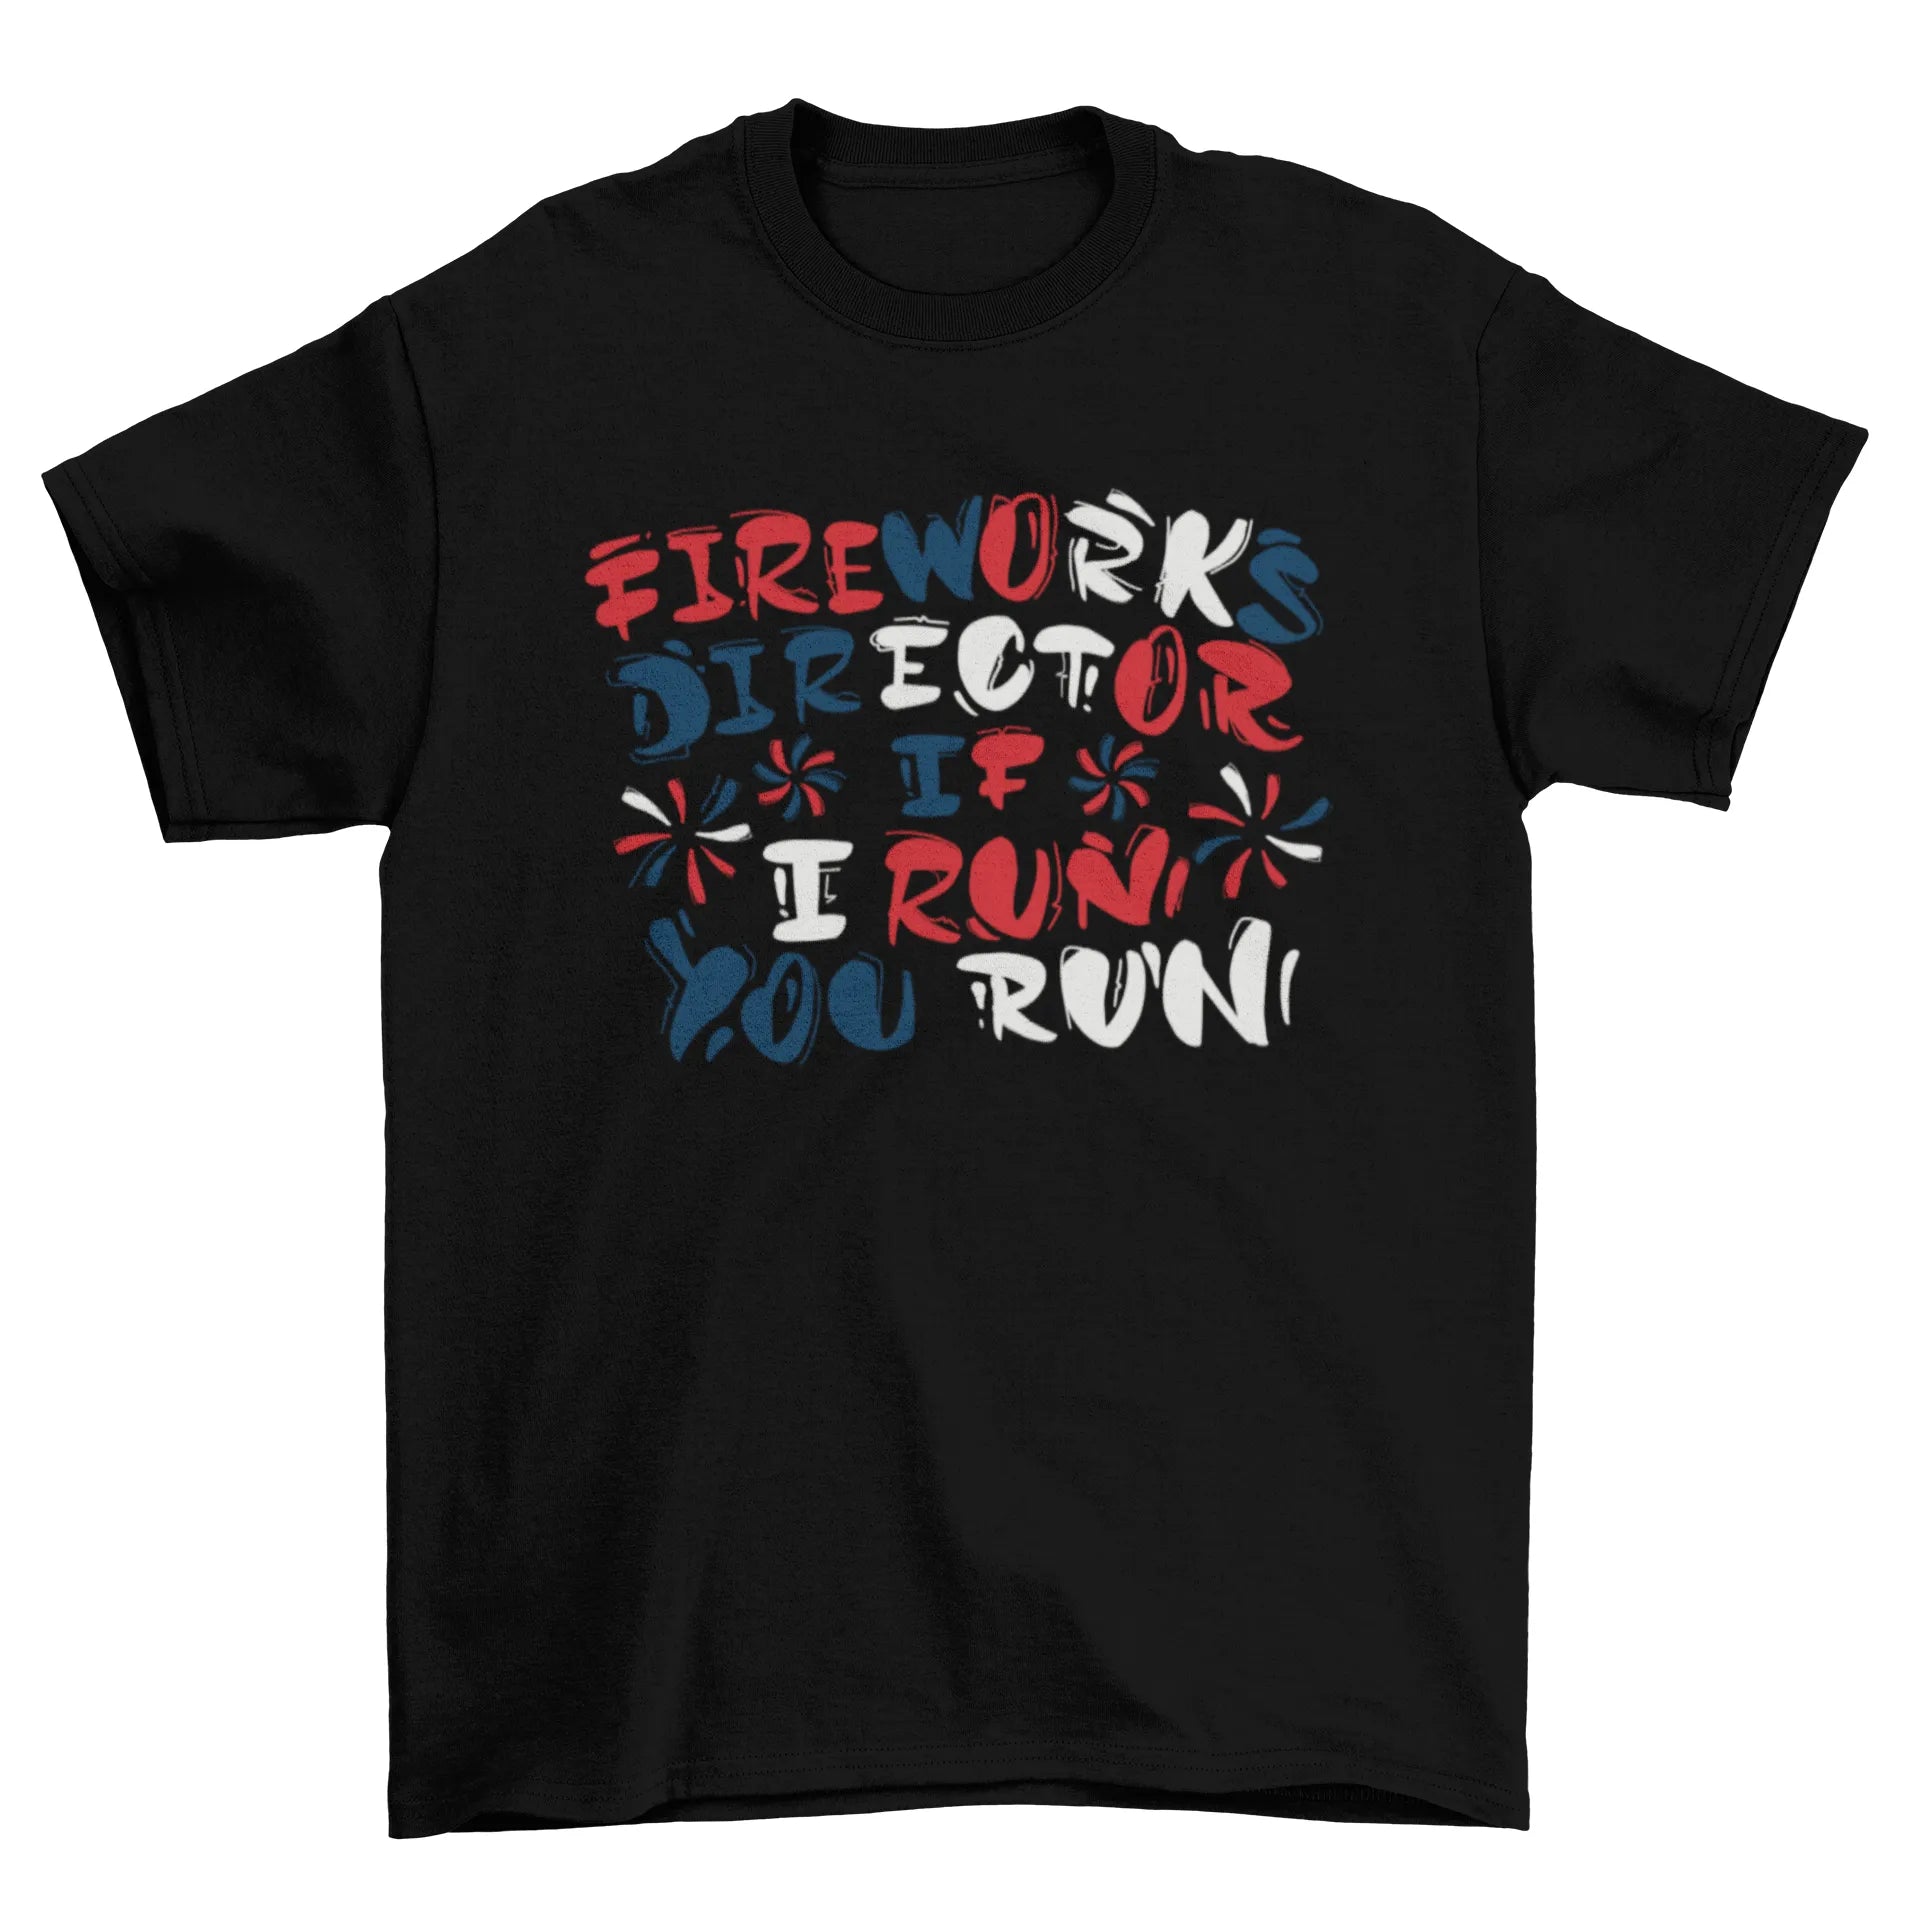 Fourth of july fireworks director t-shirt